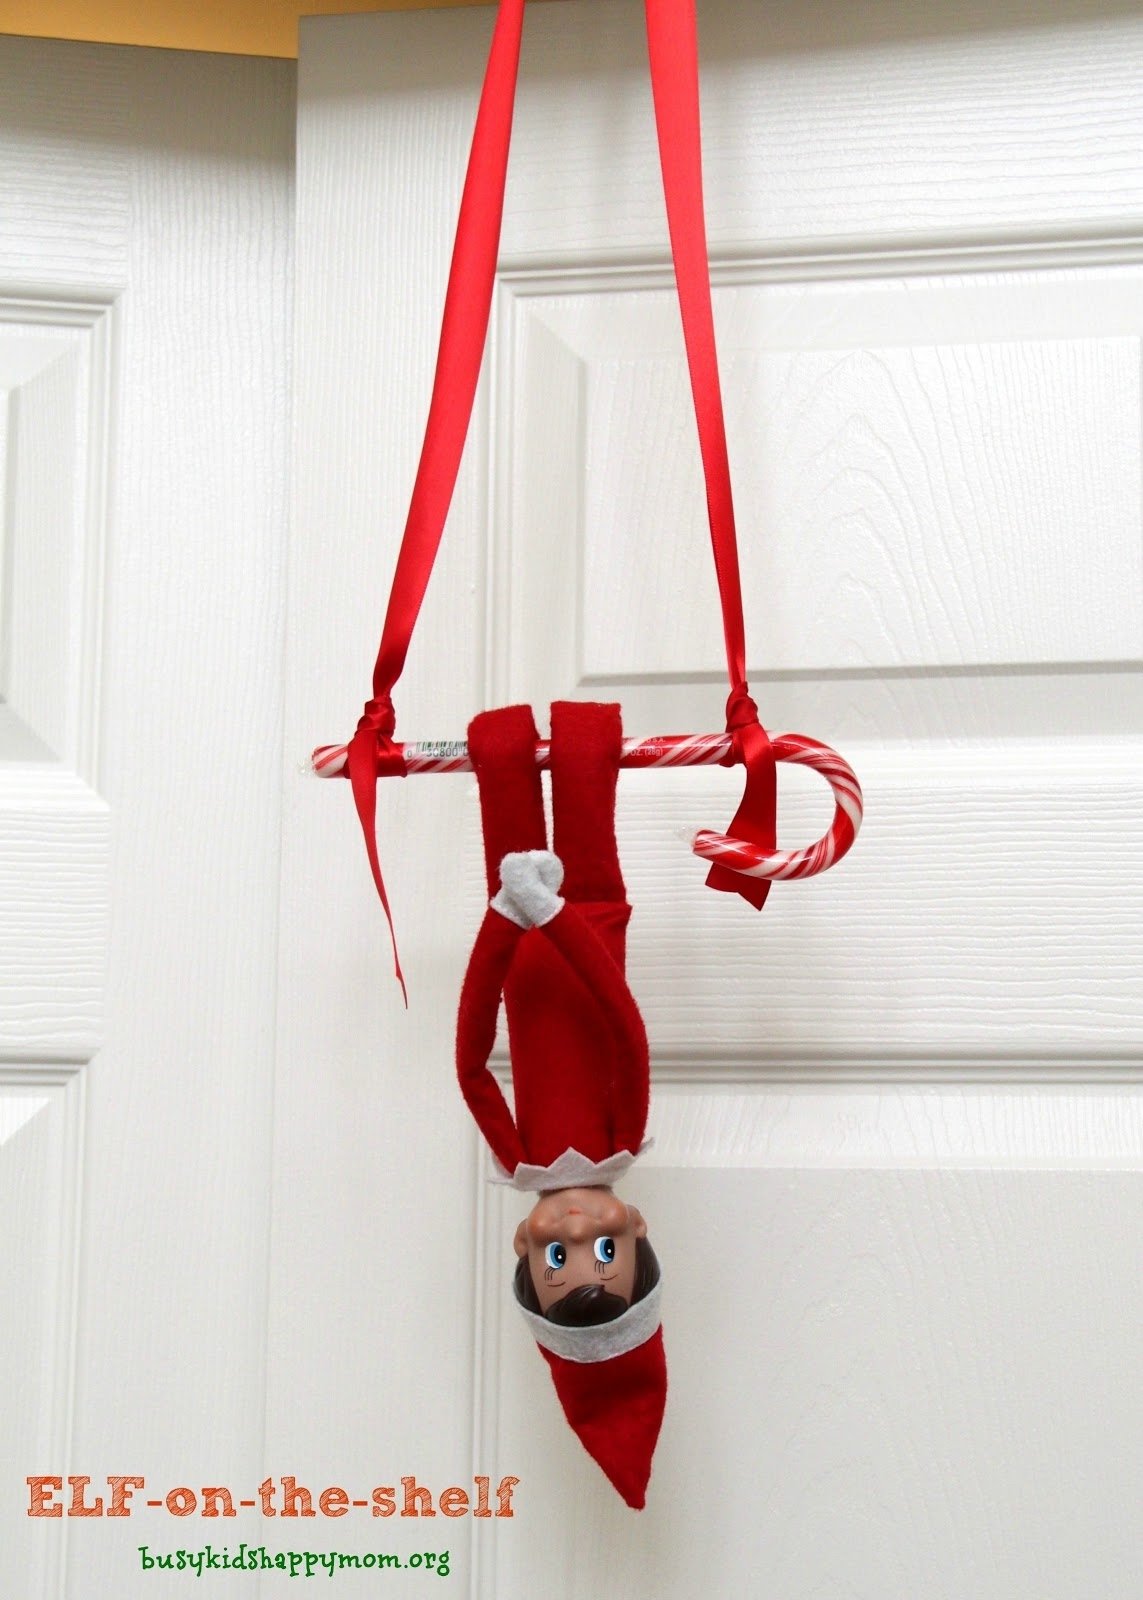 10 Great Best Elf On The Shelf Ideas stuck need new ideas for your elf on the shelf 9 2022